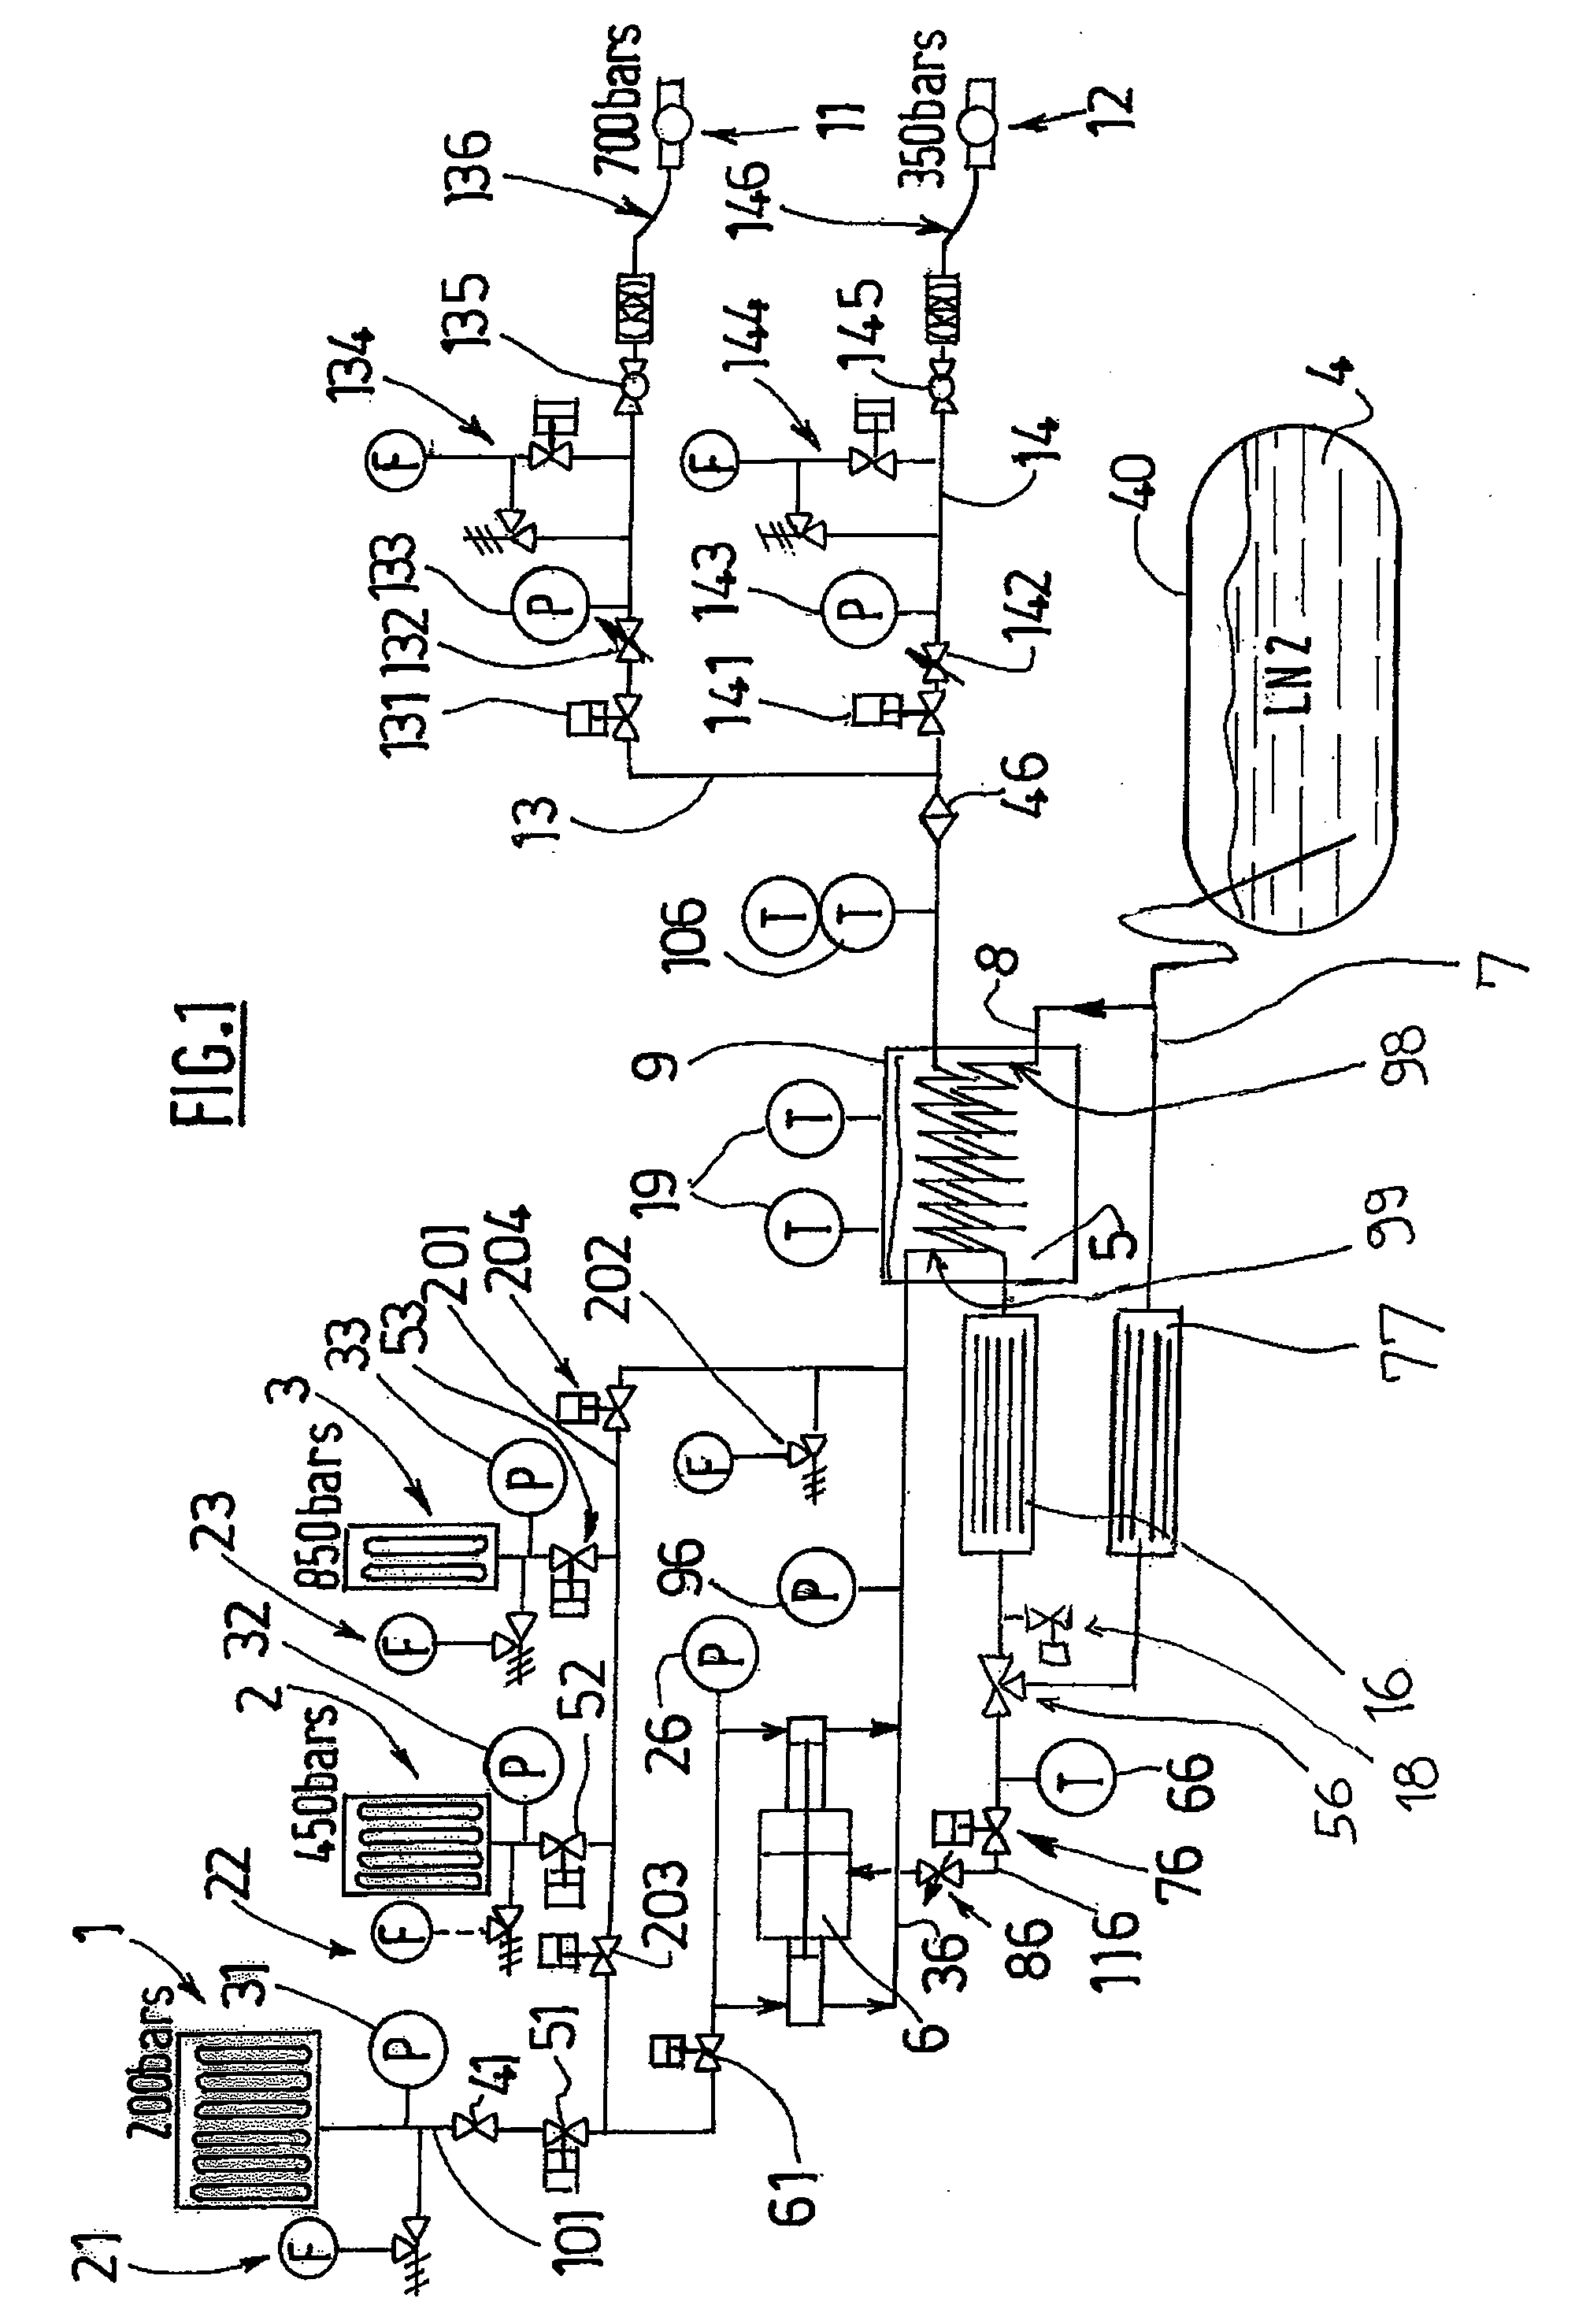 Device And Method For Filling A Container With A Gas Under Pressure